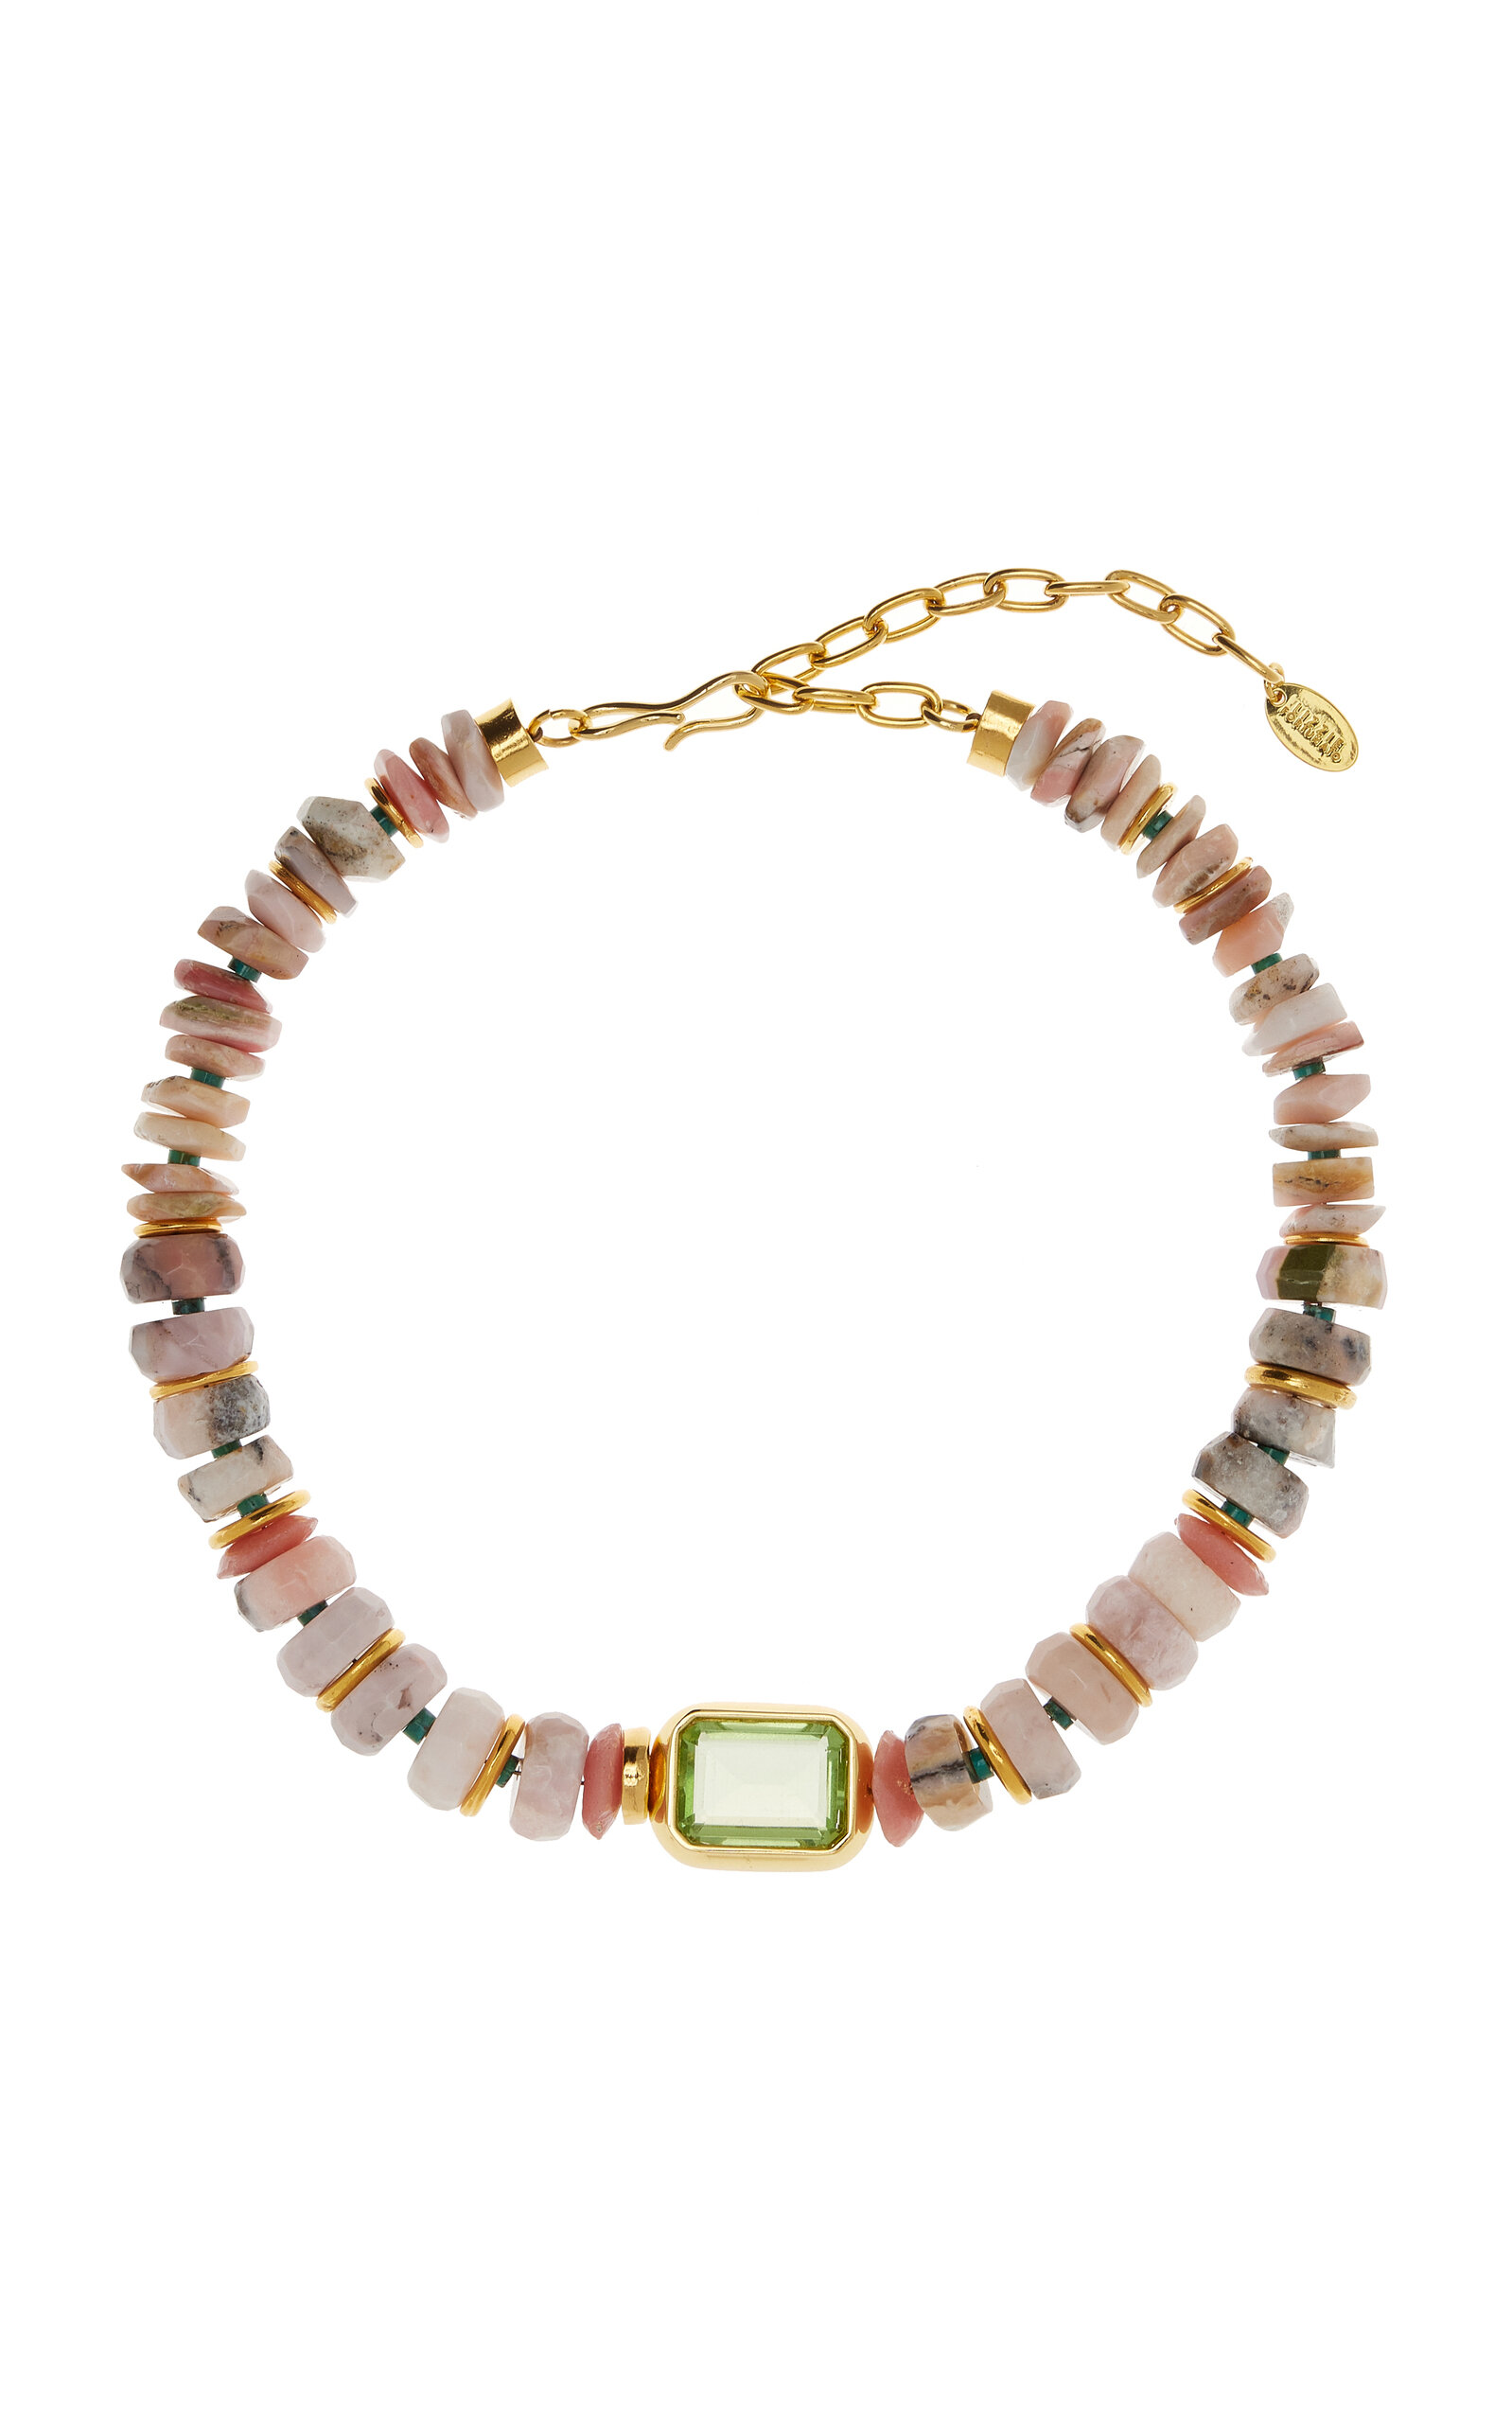 Lizzie Fortunato Women's Exclusive Goddess Beaded Necklace